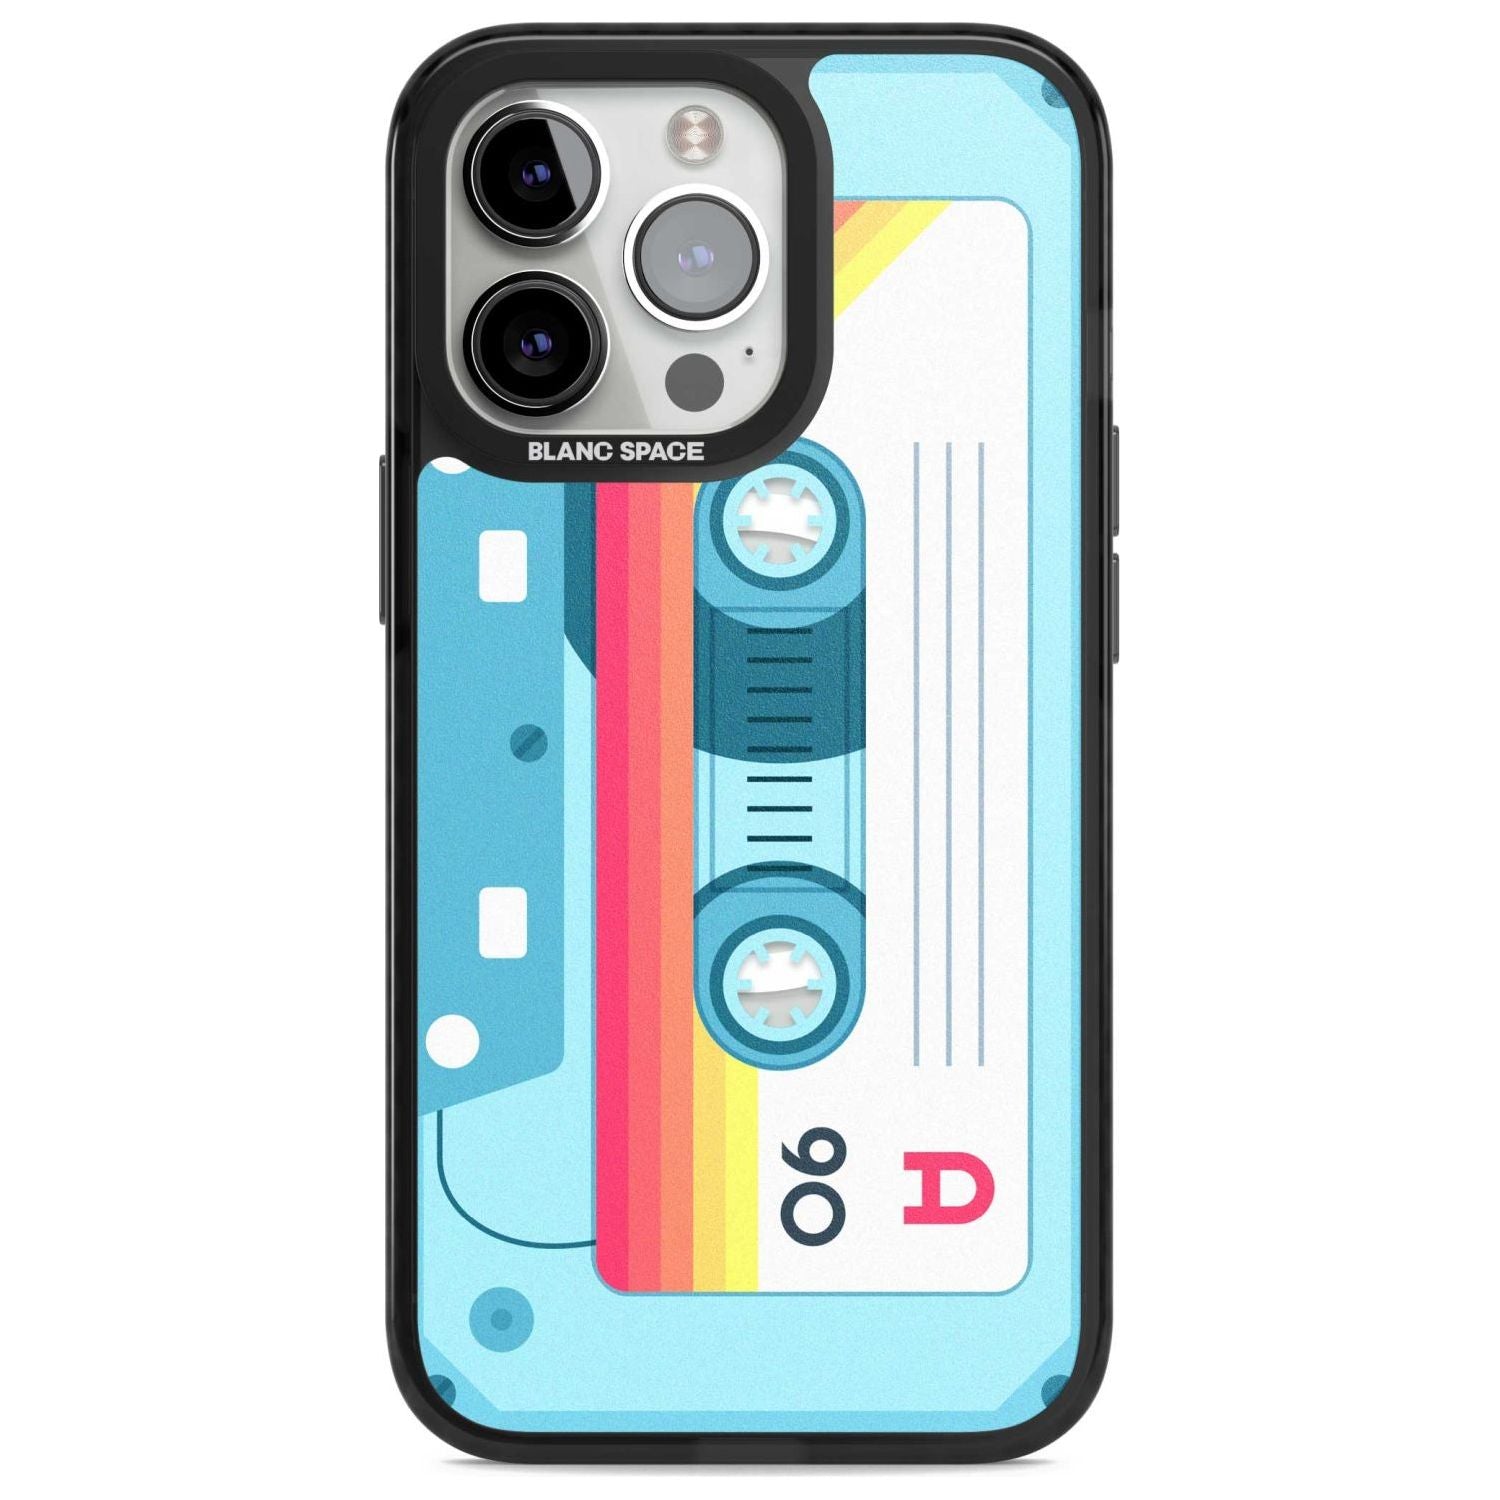 Personalised Sporty Cassette Custom Phone Case iPhone 15 Pro Max / Magsafe Black Impact Case,iPhone 15 Pro / Magsafe Black Impact Case,iPhone 14 Pro Max / Magsafe Black Impact Case,iPhone 14 Pro / Magsafe Black Impact Case,iPhone 13 Pro / Magsafe Black Impact Case Blanc Space